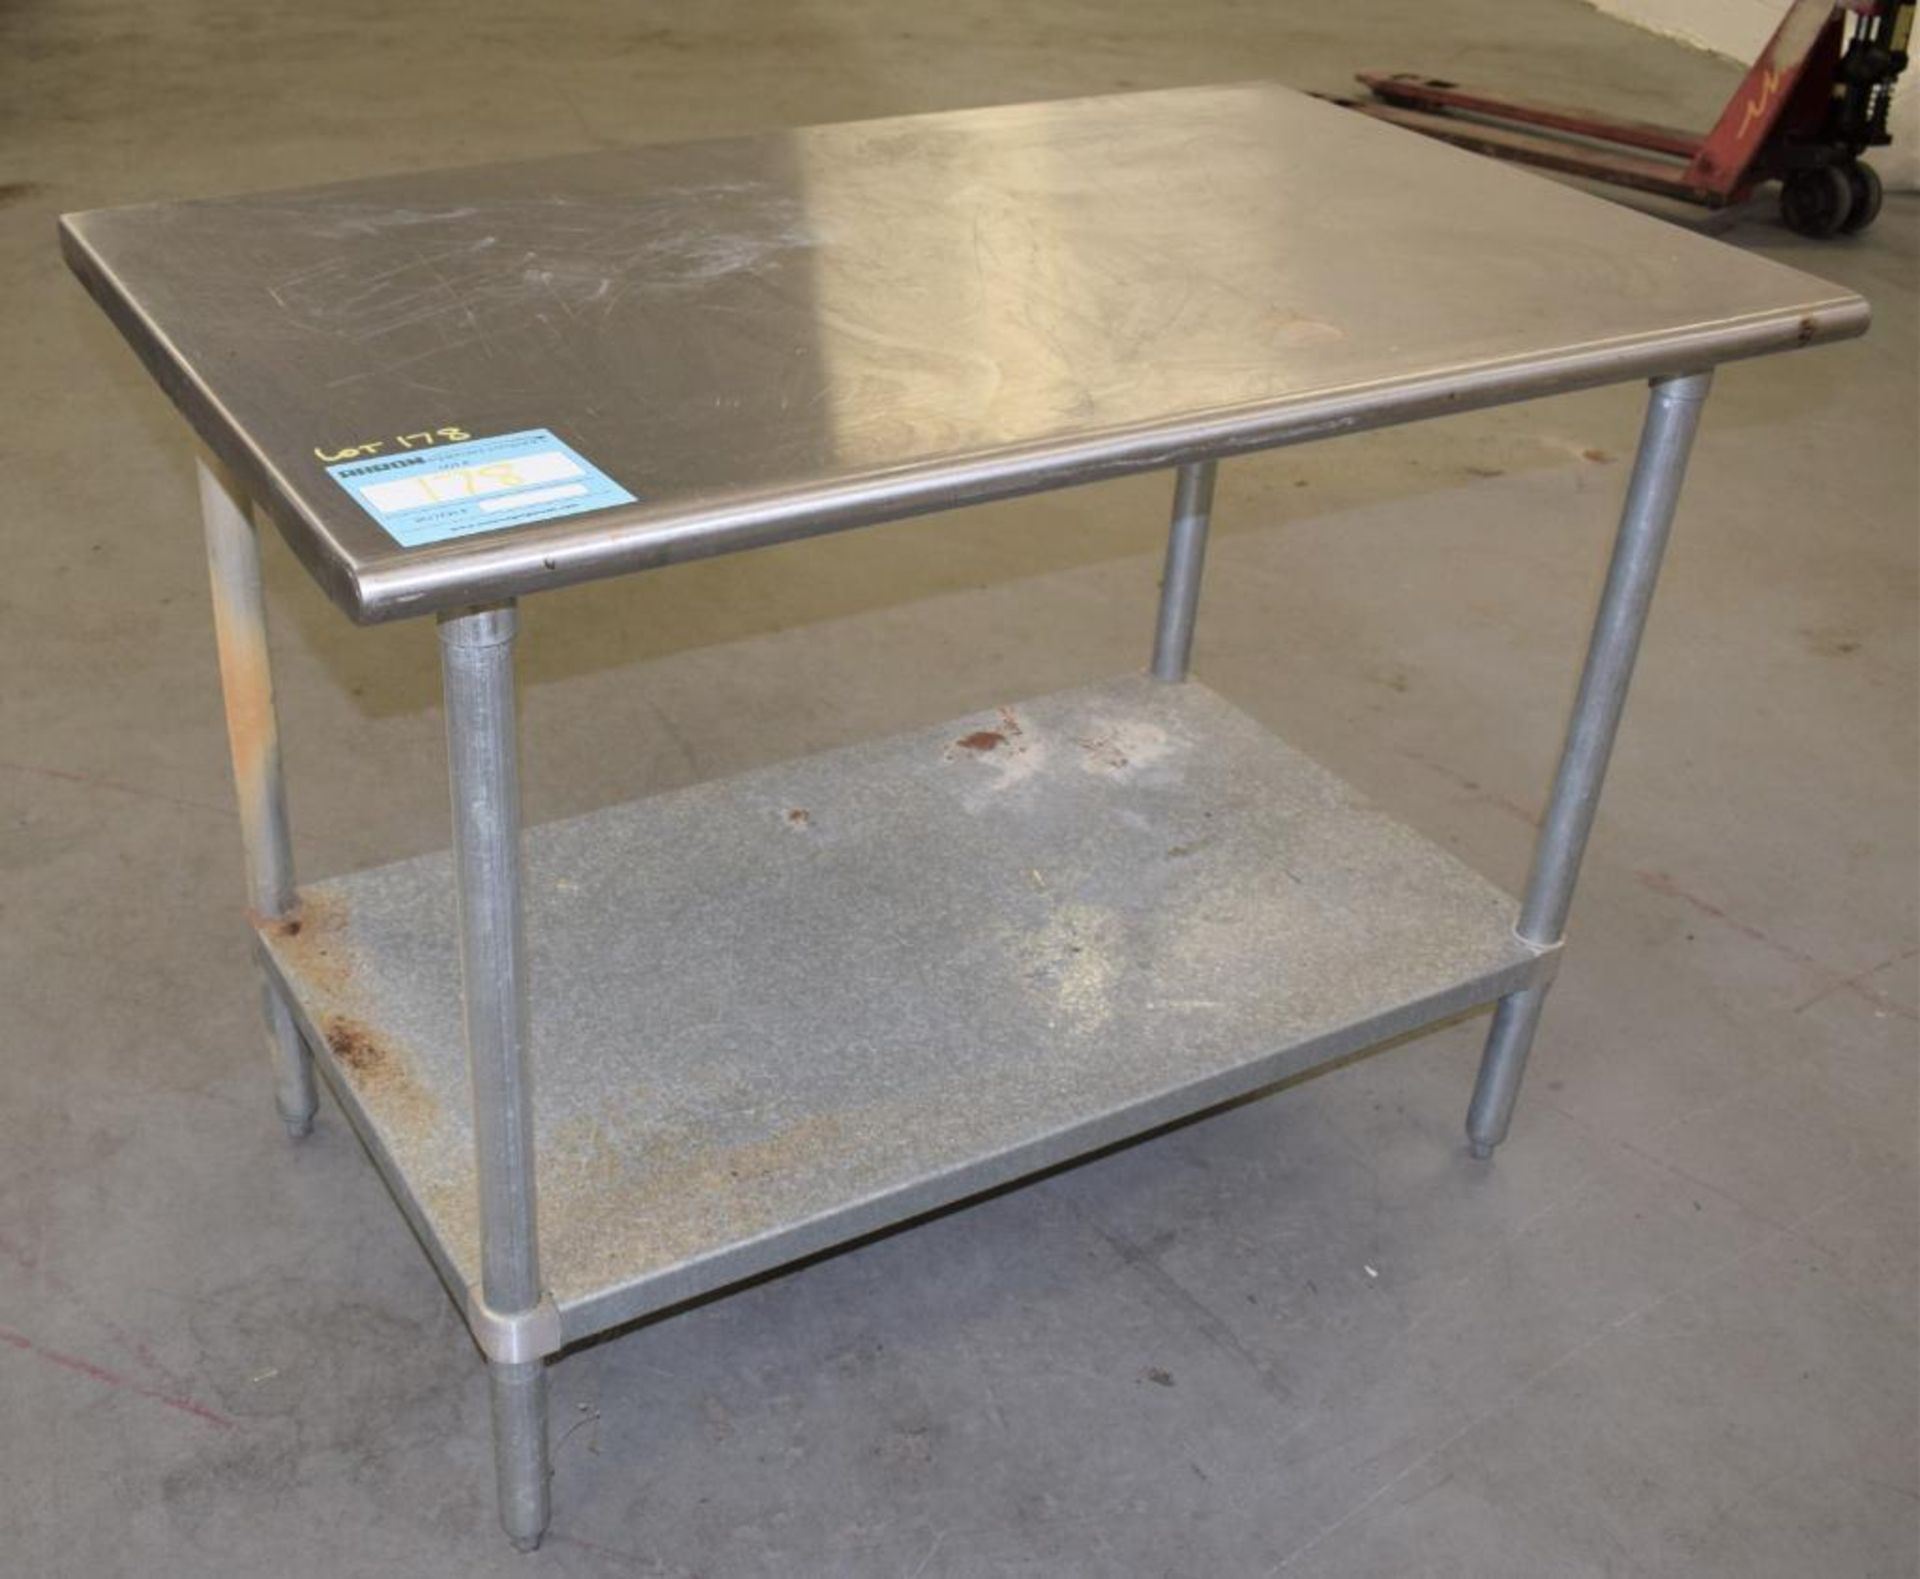 TABCO Stainless Steel Top Table. Approximate 30" wide x 48" long x 36" tall. With bottom shelf and (